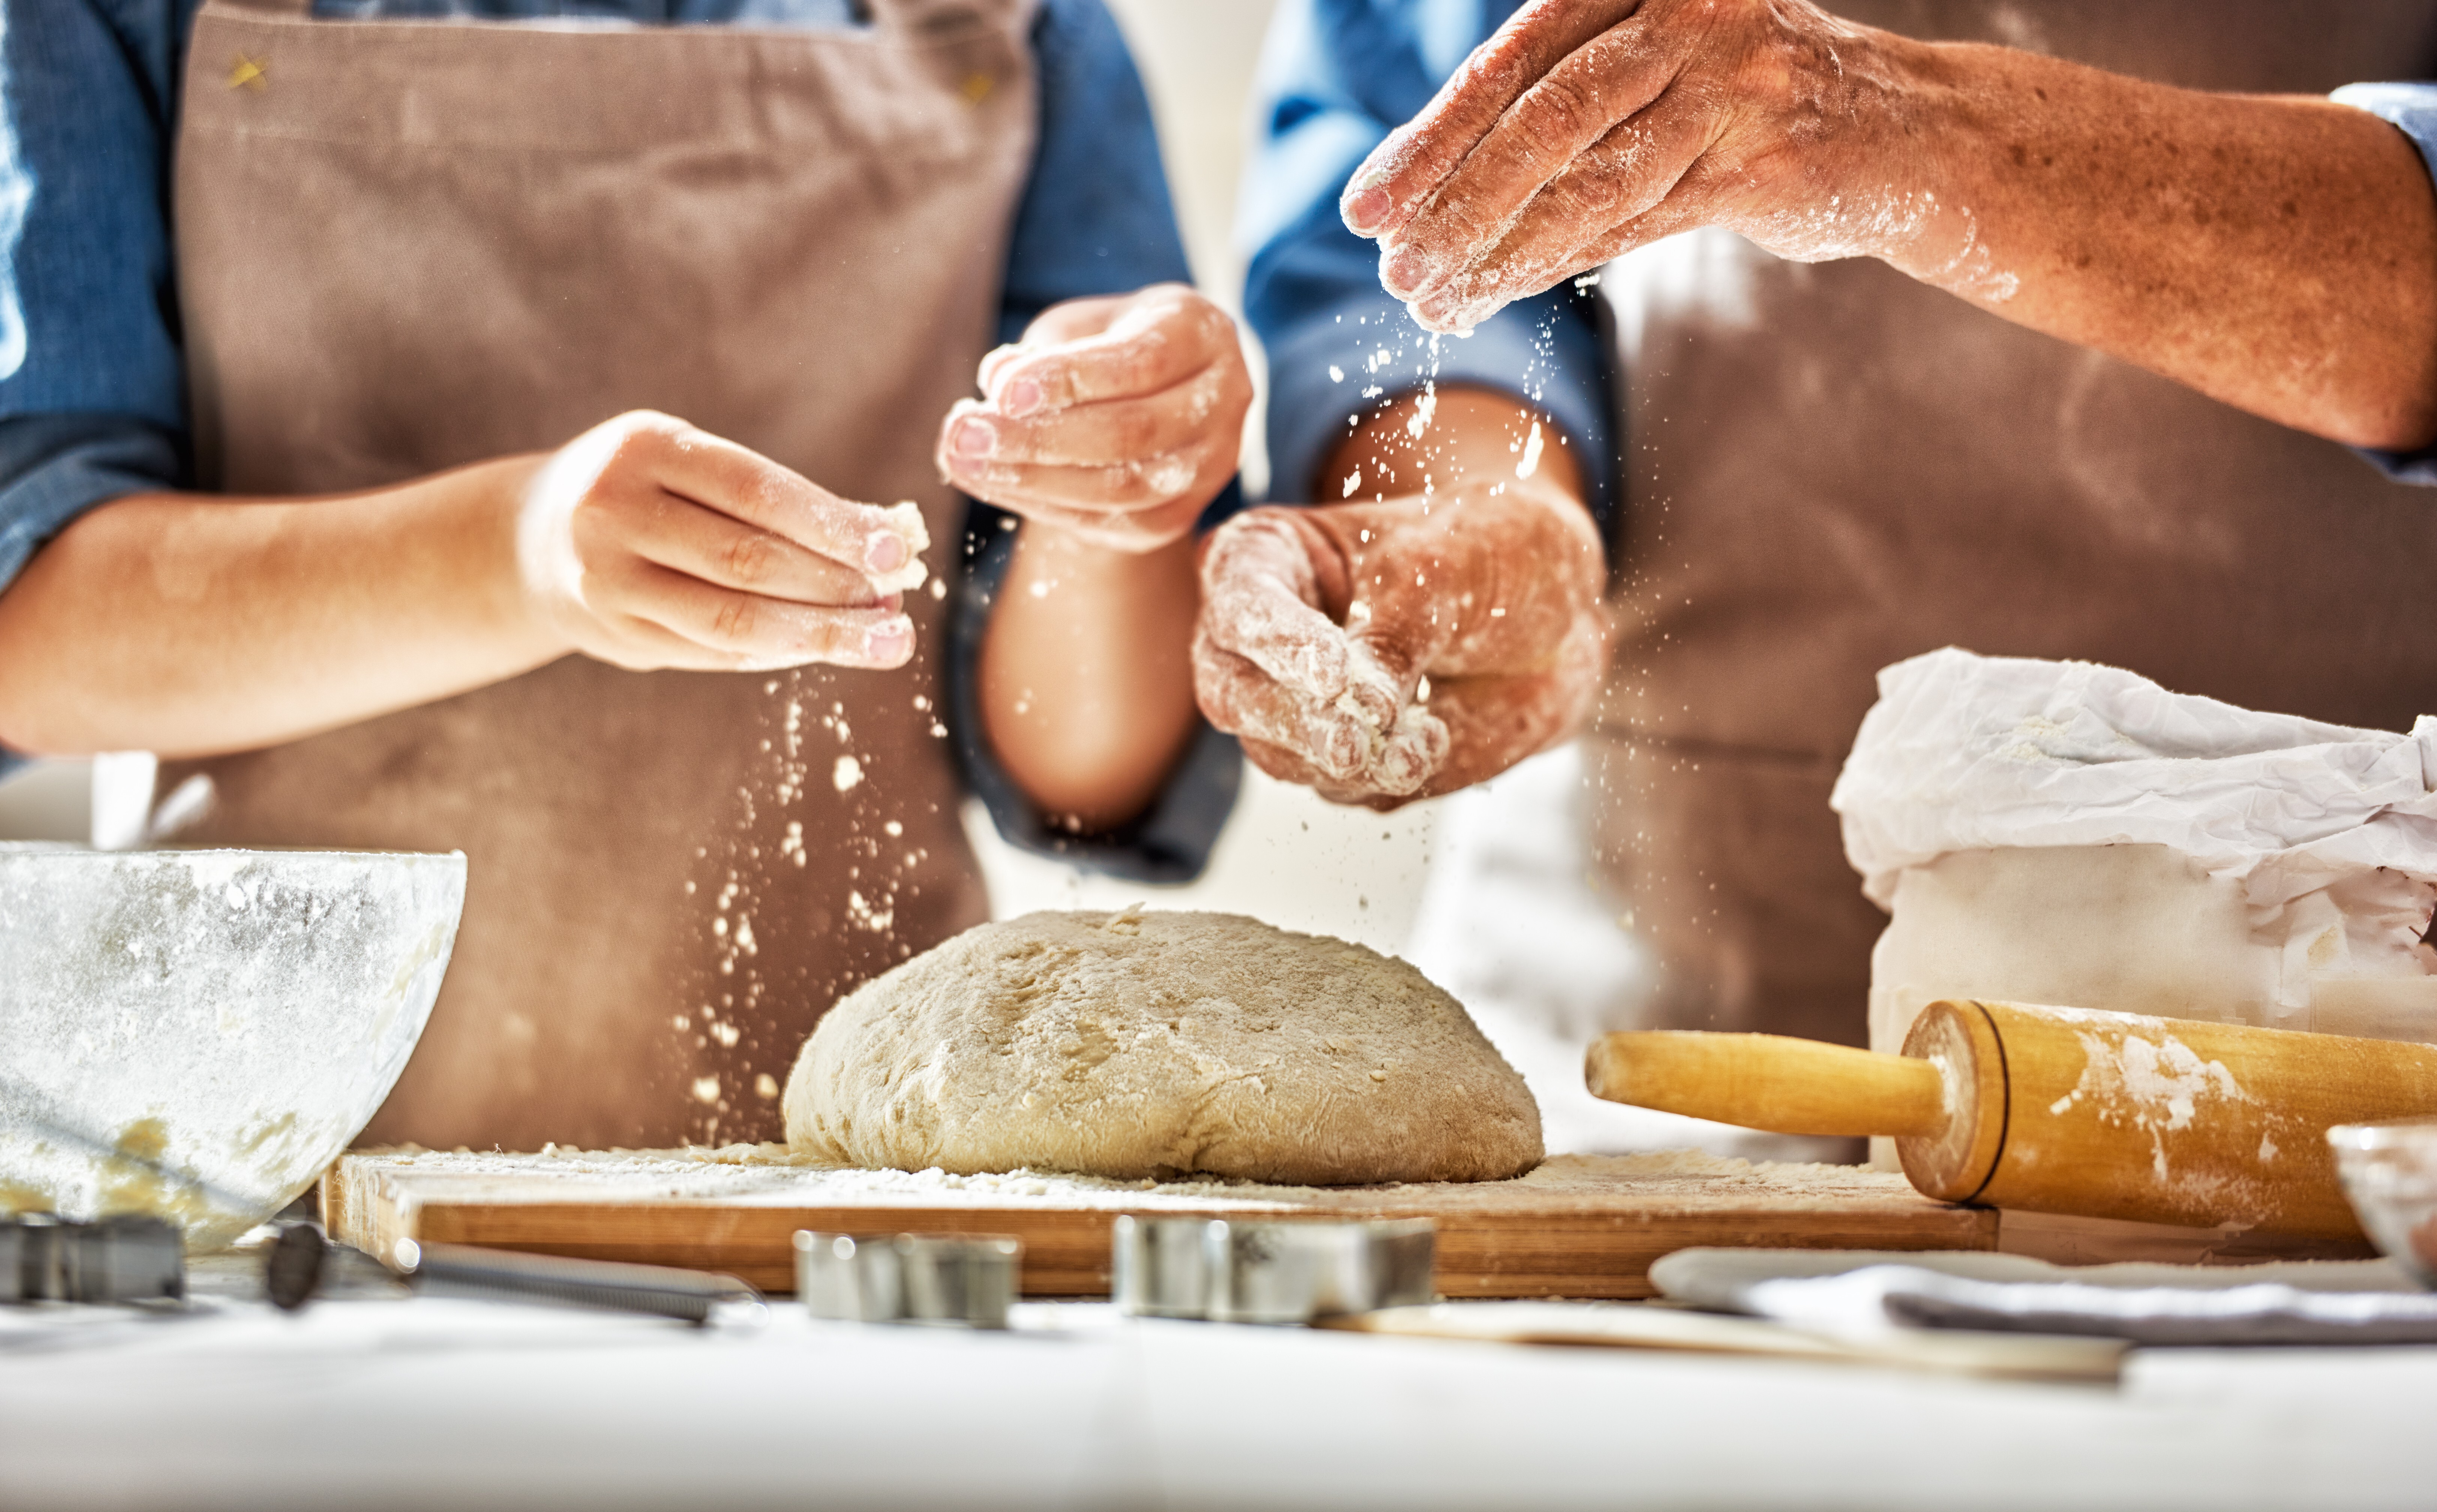 Learning activity holidays include artisan bread making. Photo: Shutterstock